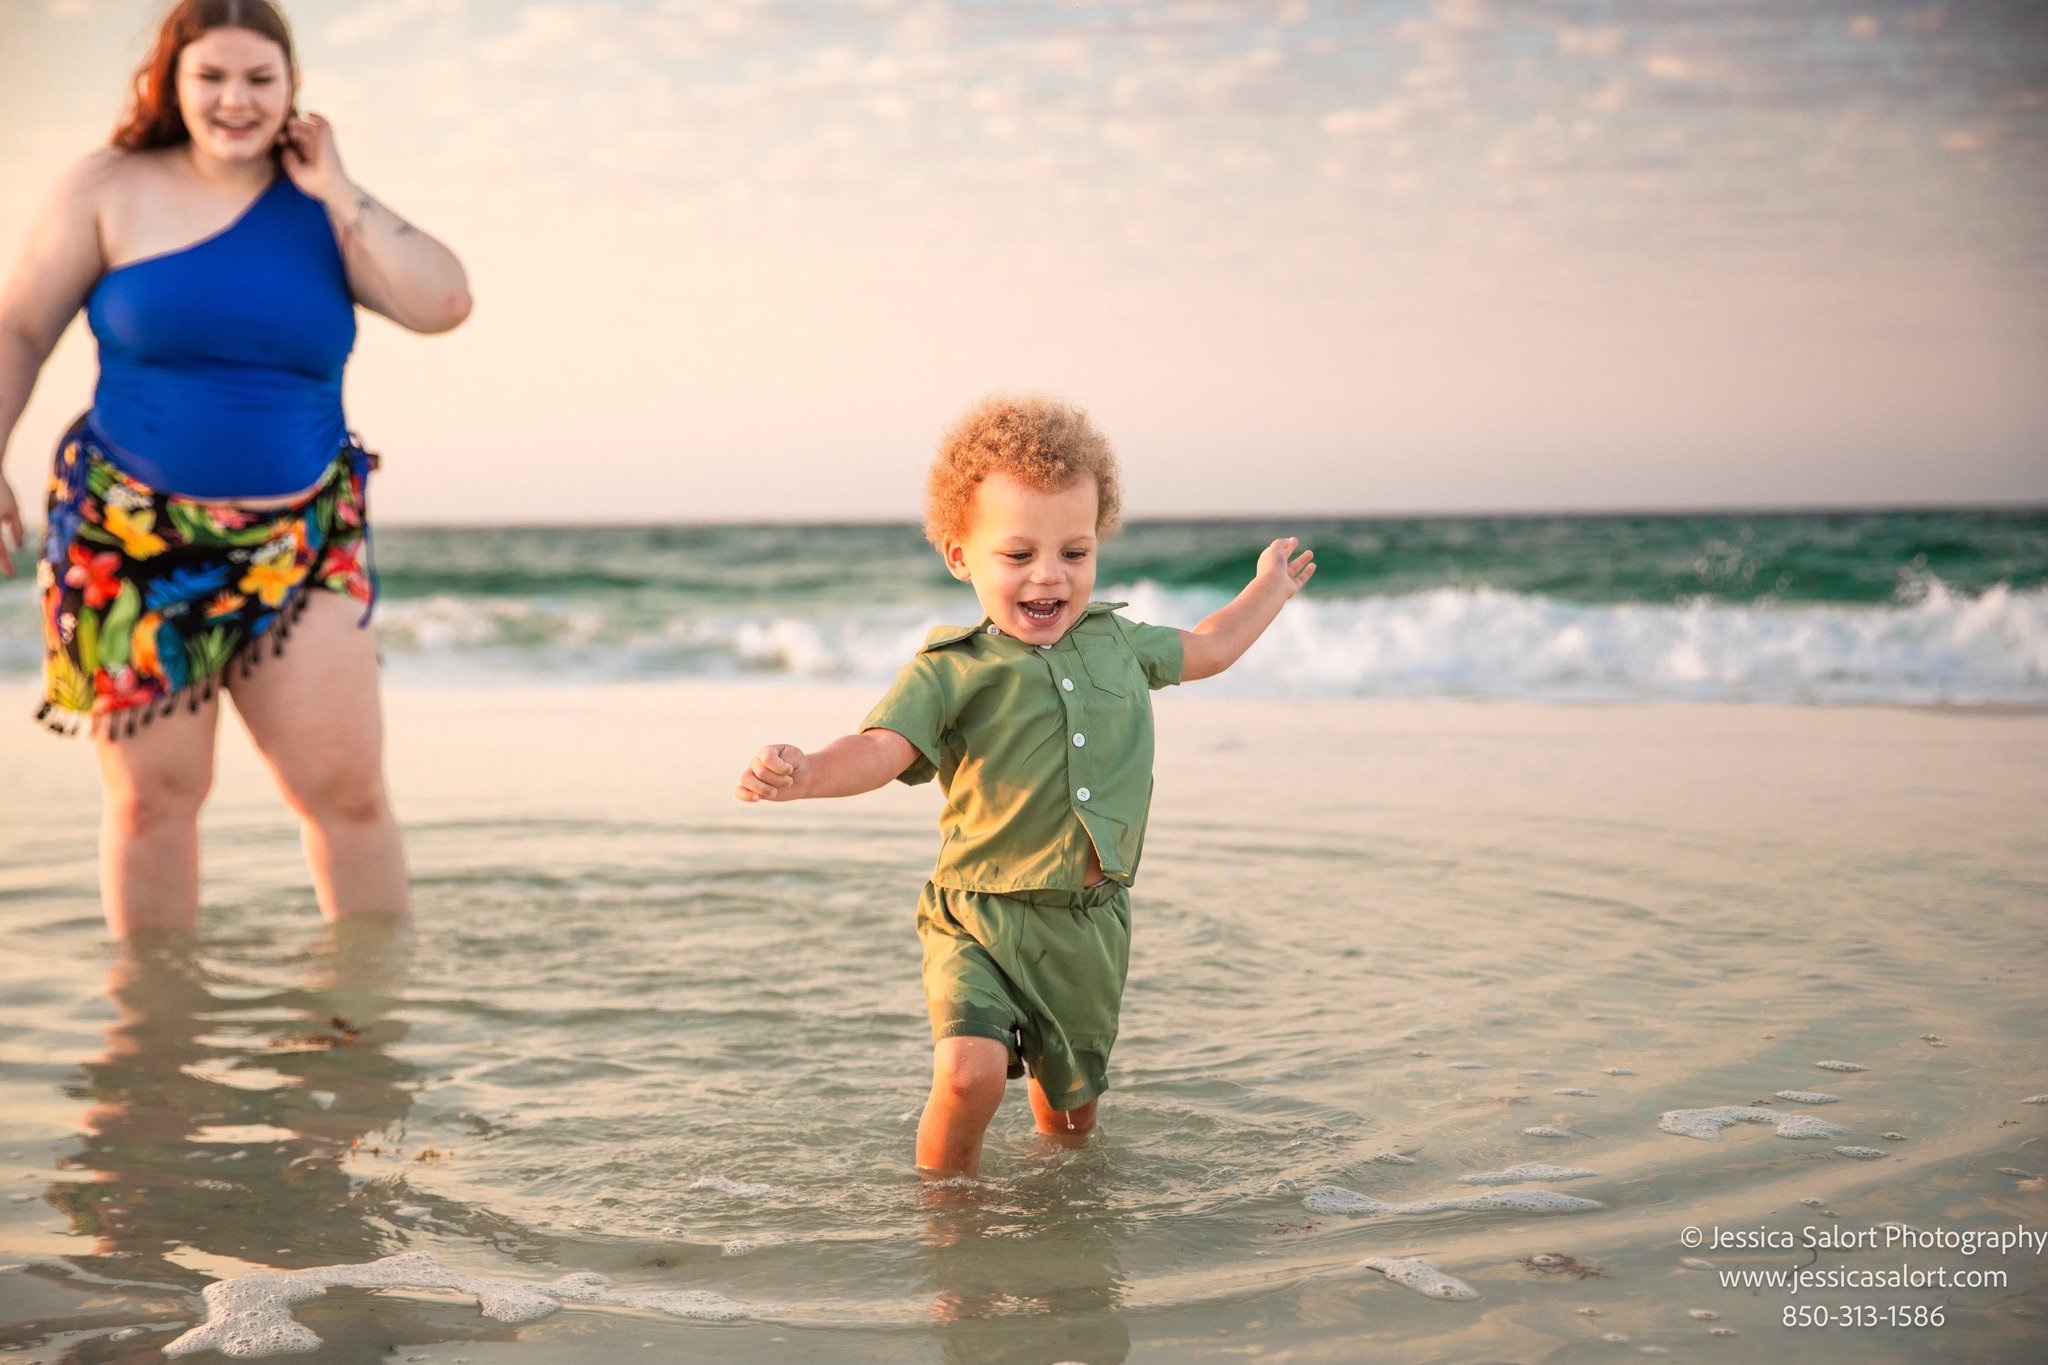 Sweetest little dude at Navarre Beach for a sunrise session this week. 

Book here🔽
https://www.jessicasalortphotos.com/sunrise-morning-mini-sessions

#navarrebeachphotographer
#navarrefamilyphotographer
#navarrephotographer
#navarreflorida
#jessica